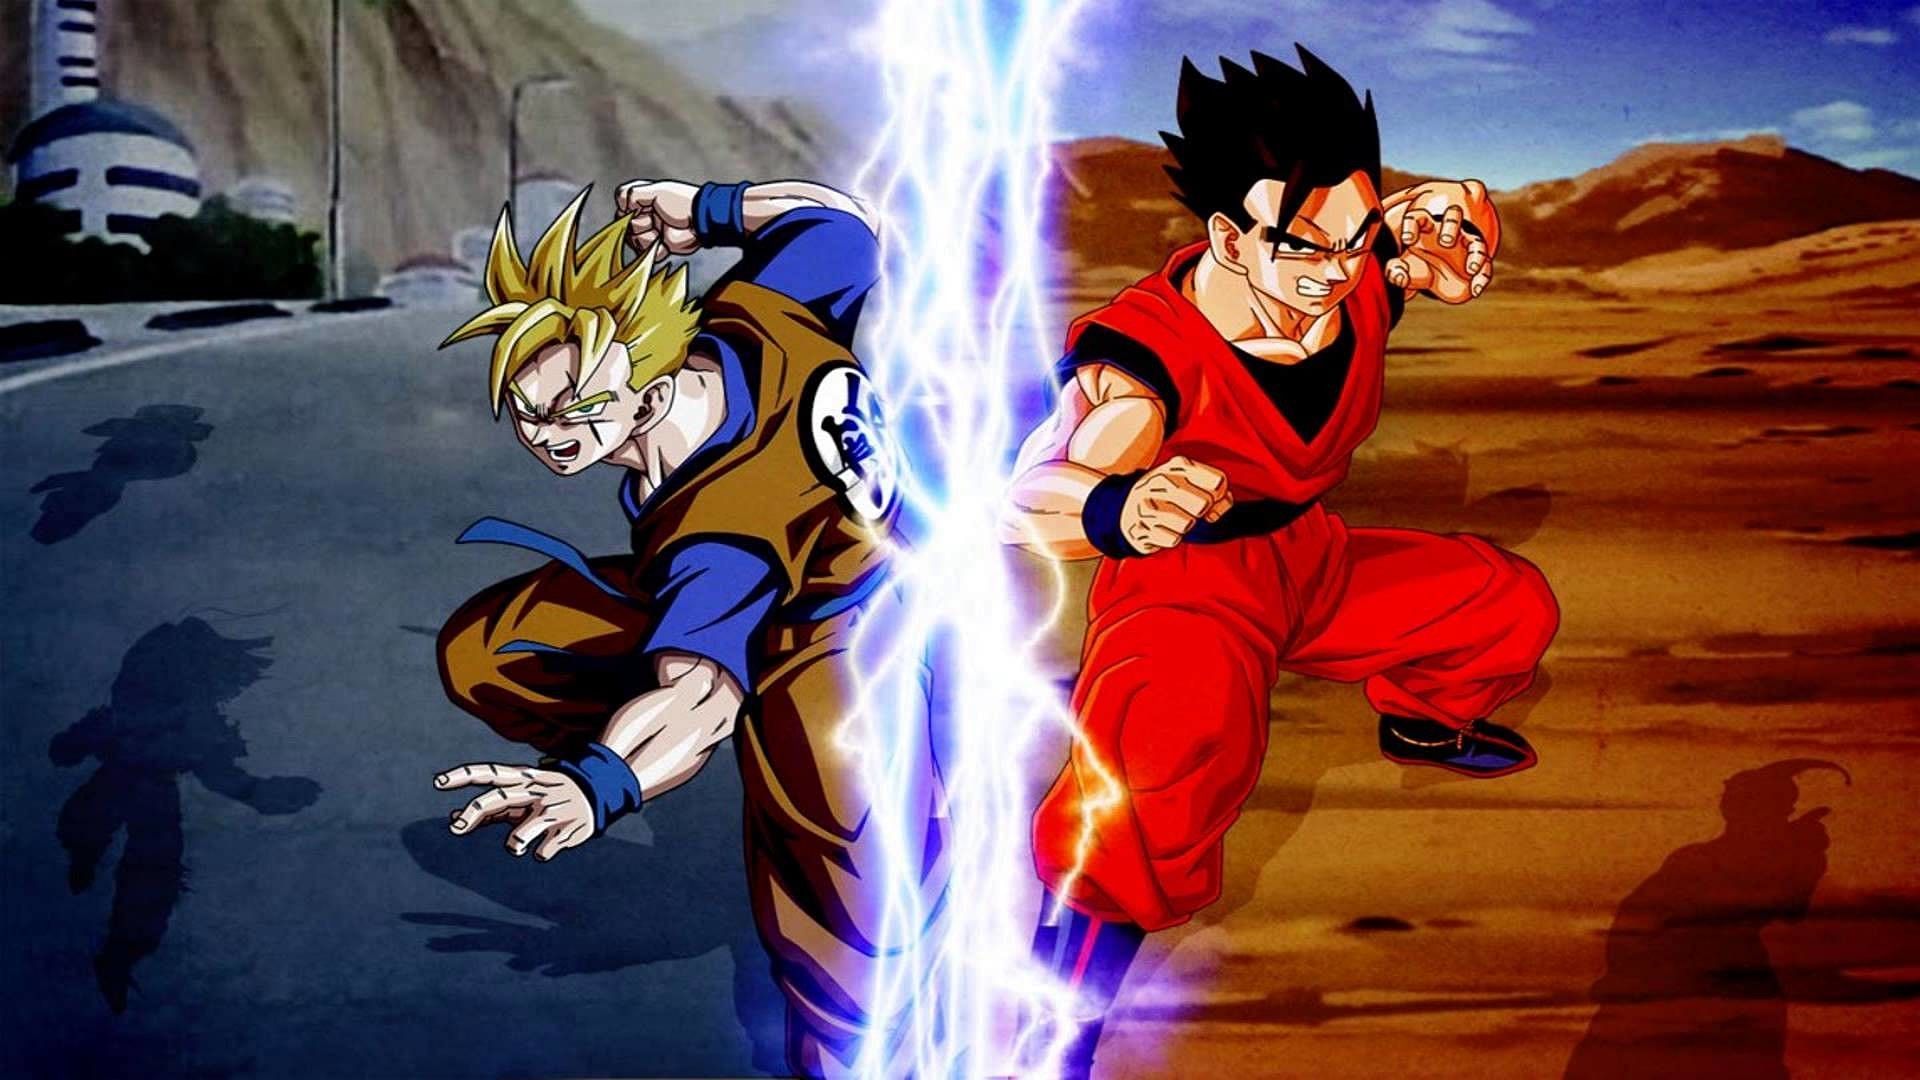 Gohan has done both annoying and amazing things in the Dragon Ball series (Image via Toei Animation)